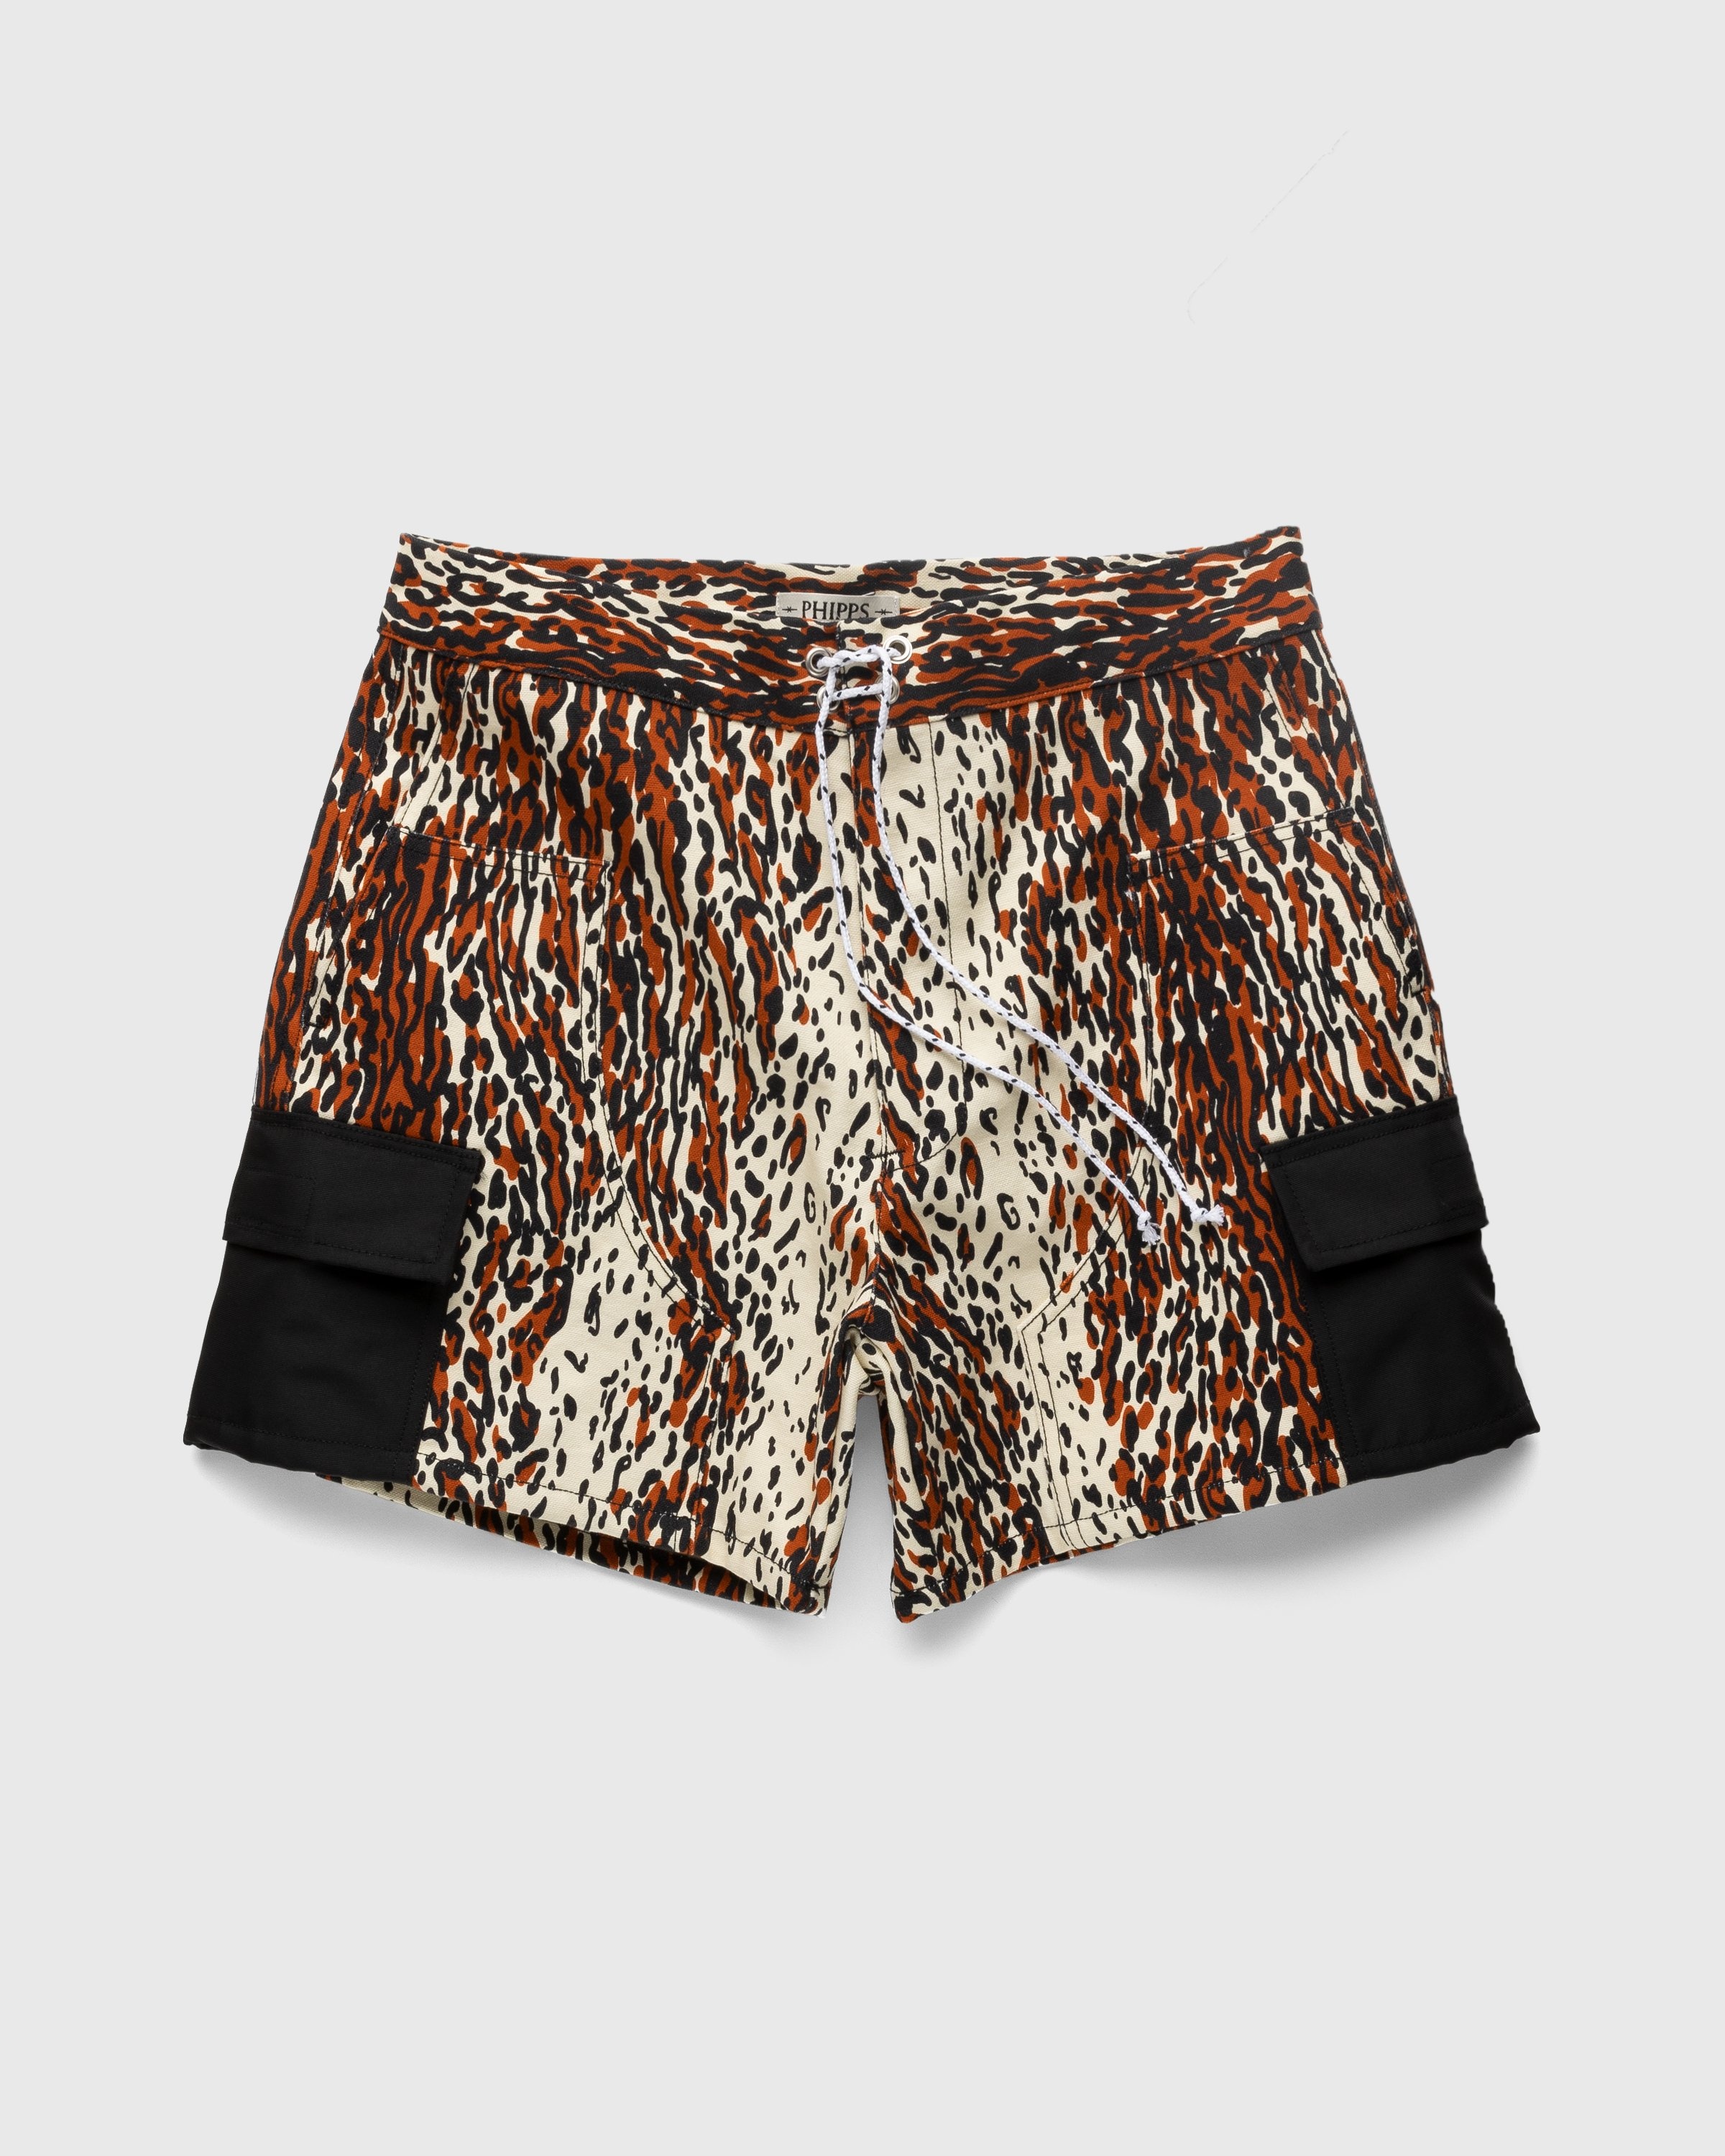 Phipps – Action Shorts Printed Canvas Leopard - Active Shorts - Brown - Image 1